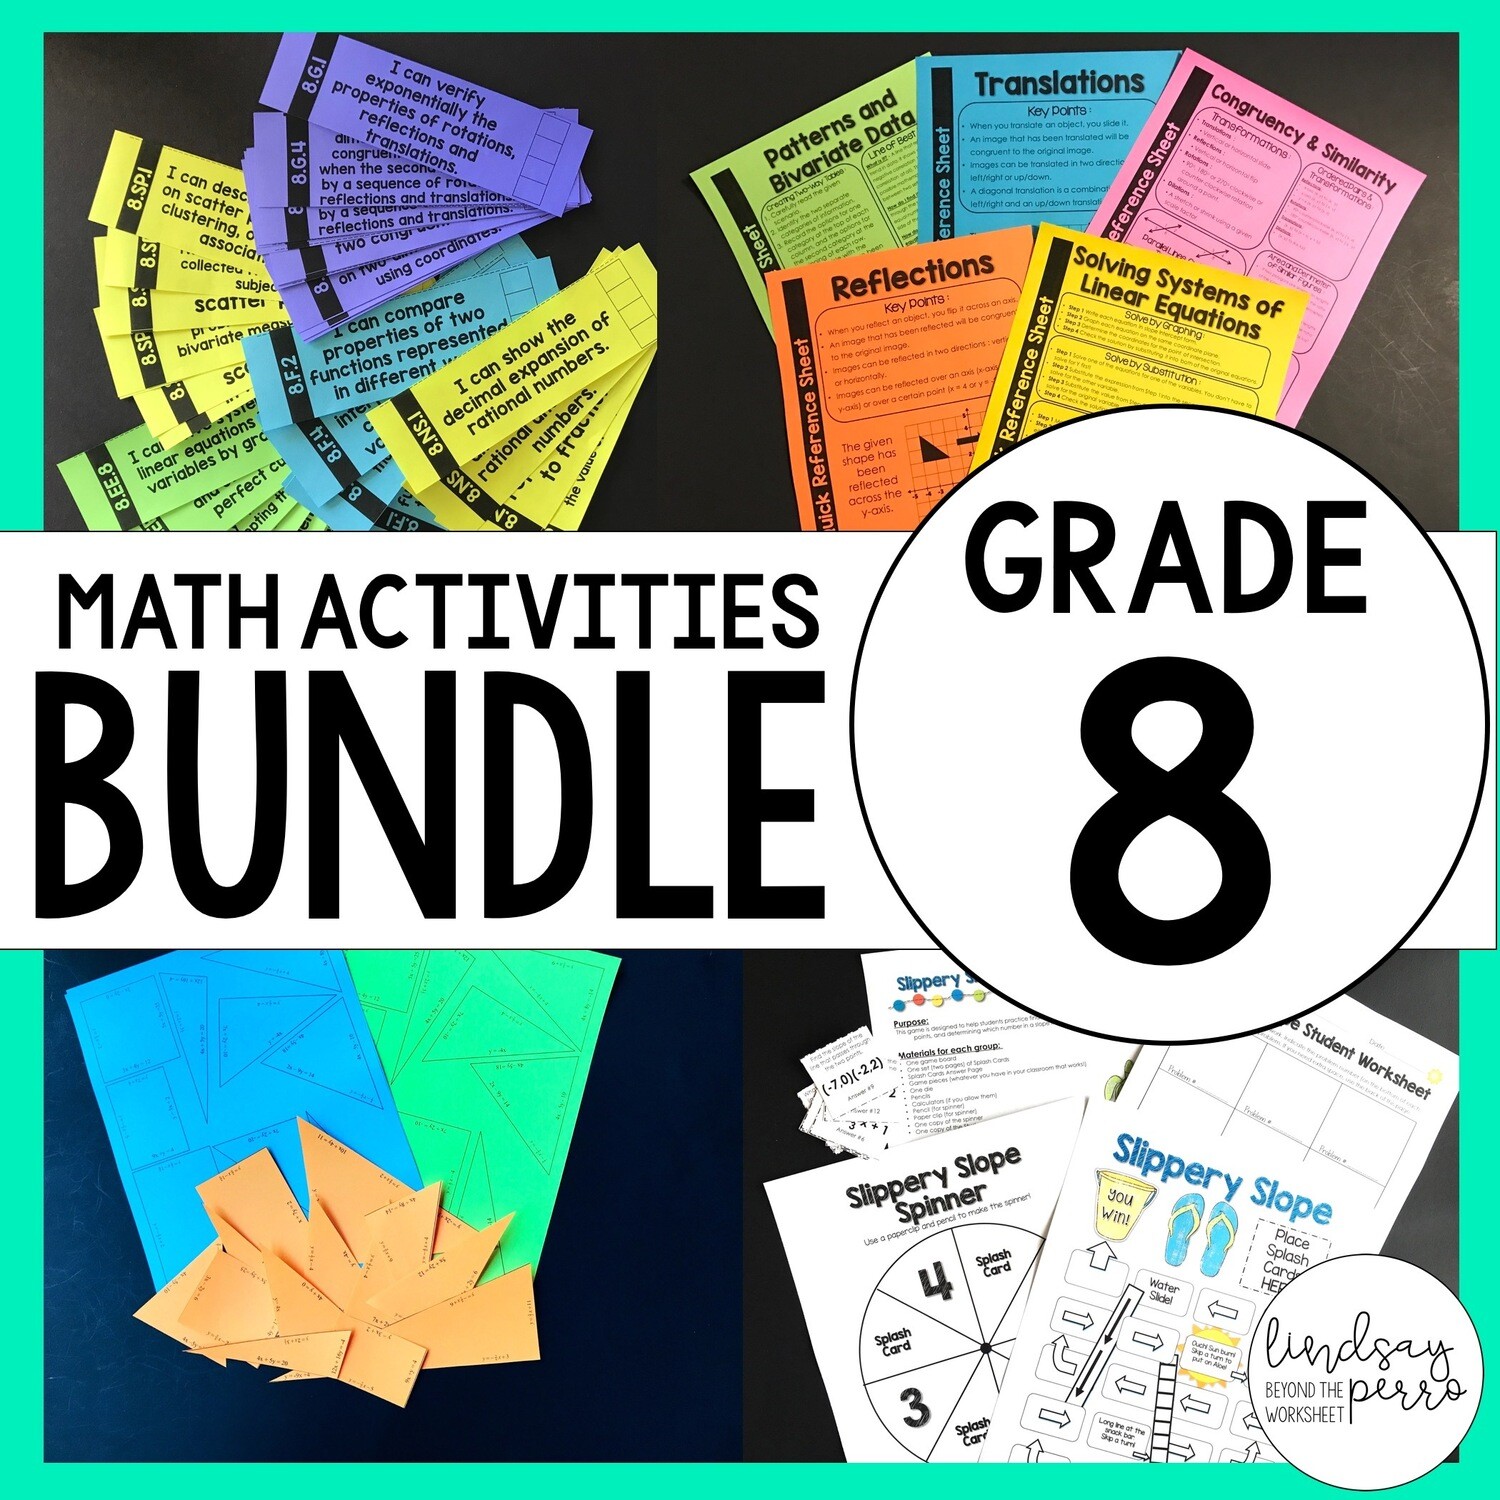 8th Grade Math Curriculum Resources: A Full Year of Activities